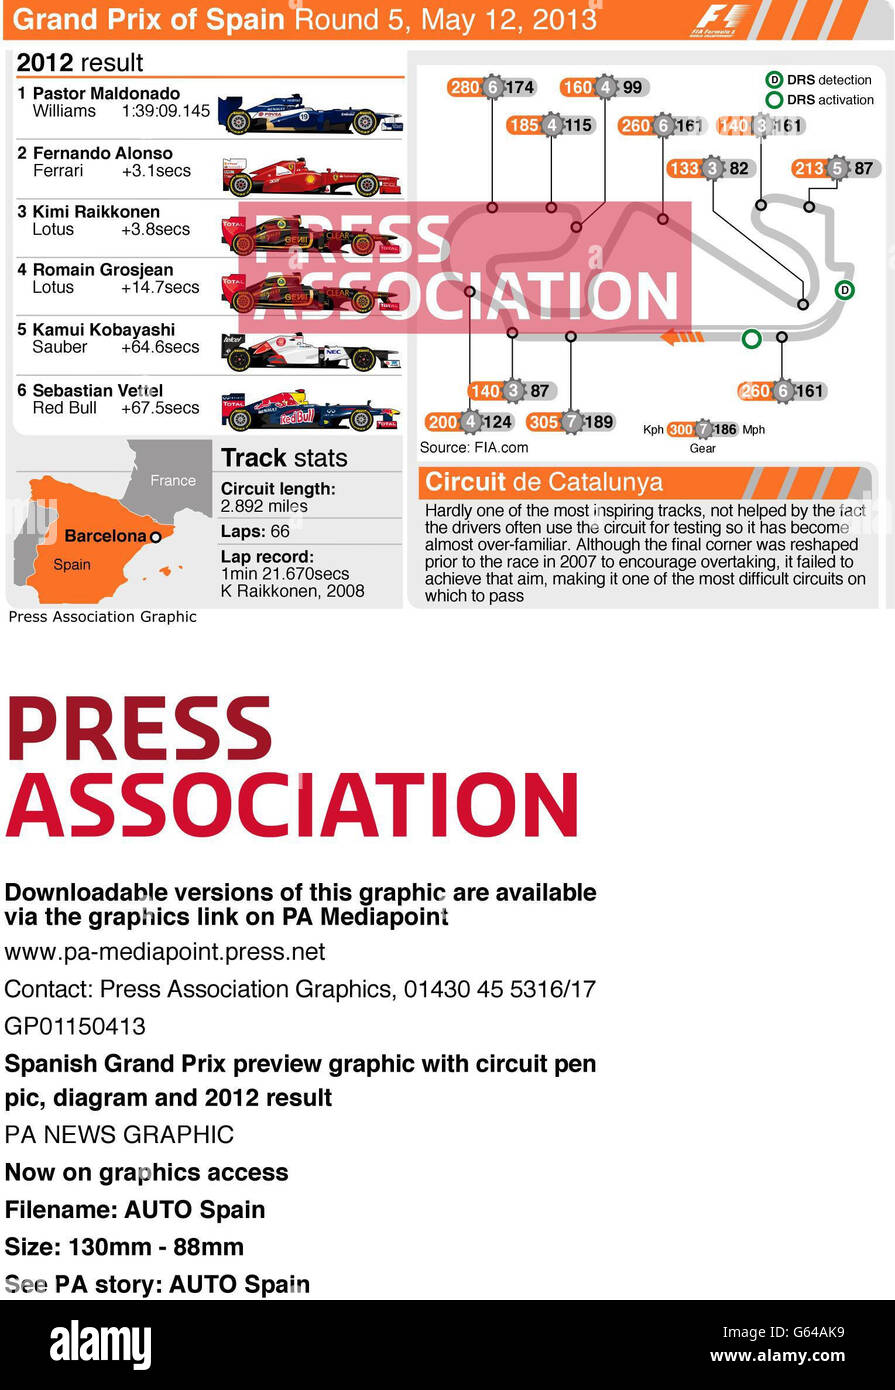 Spanish Grand Prix preview with circuit pen pic, track stats, diagram and 2012 result Stock Photo